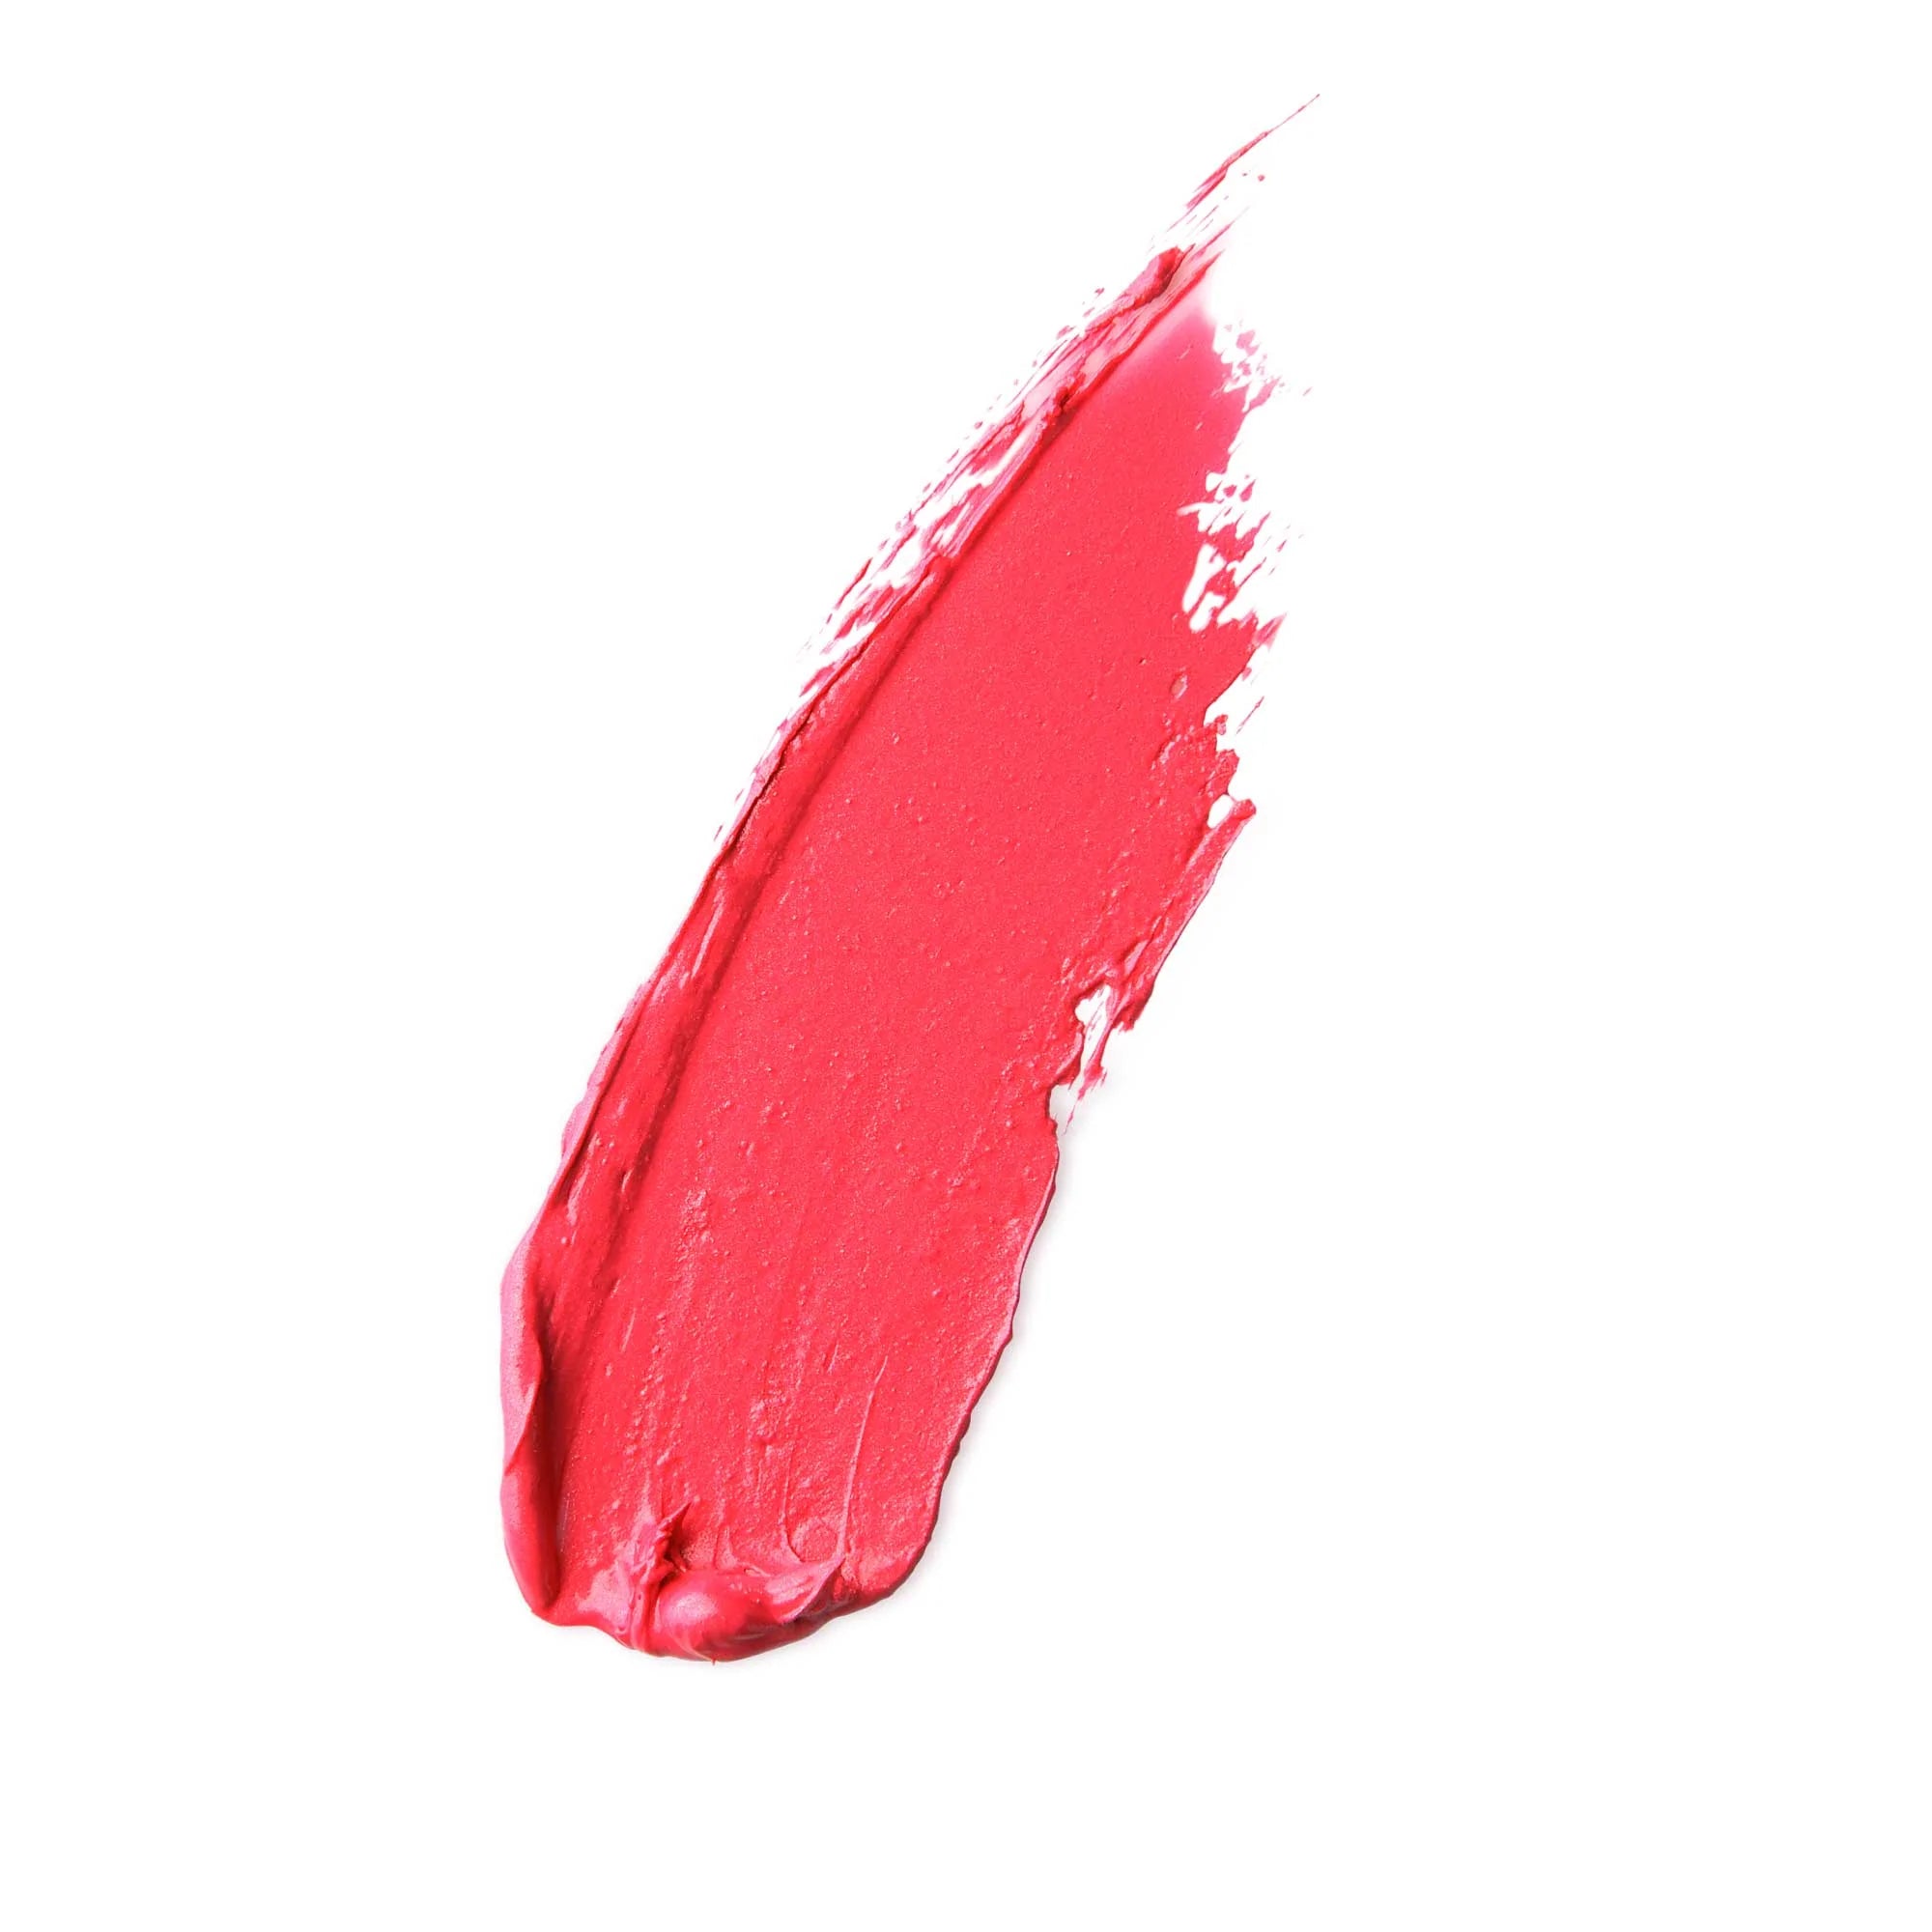 Antipodes South Pacific Coral Moisture-Boost Natural Lipstick 4g-The Living Co.